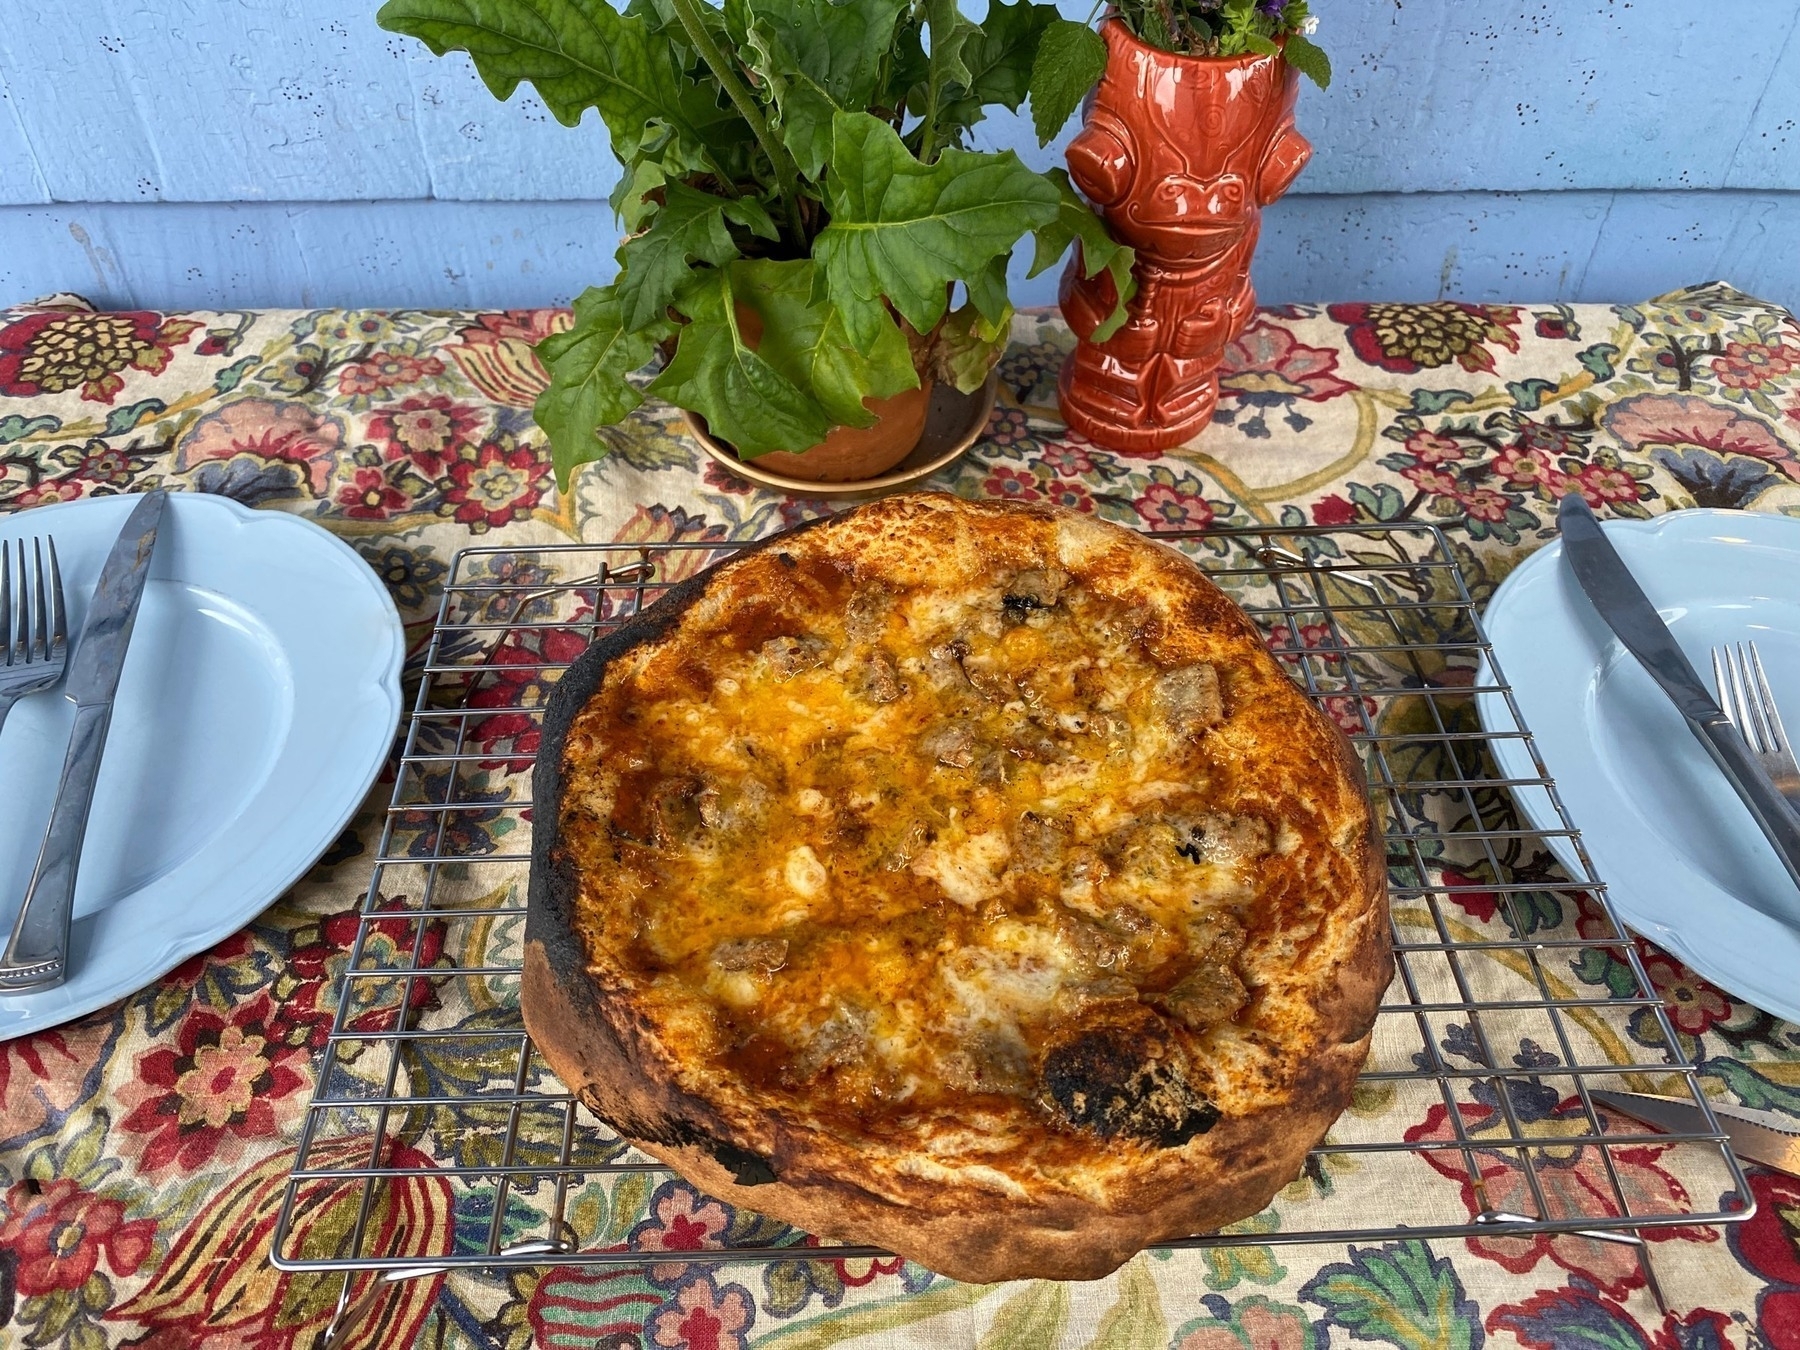 Small pizza on a cooling rack, sitting on a table with a floral cloth, blue plates, and flower vases.